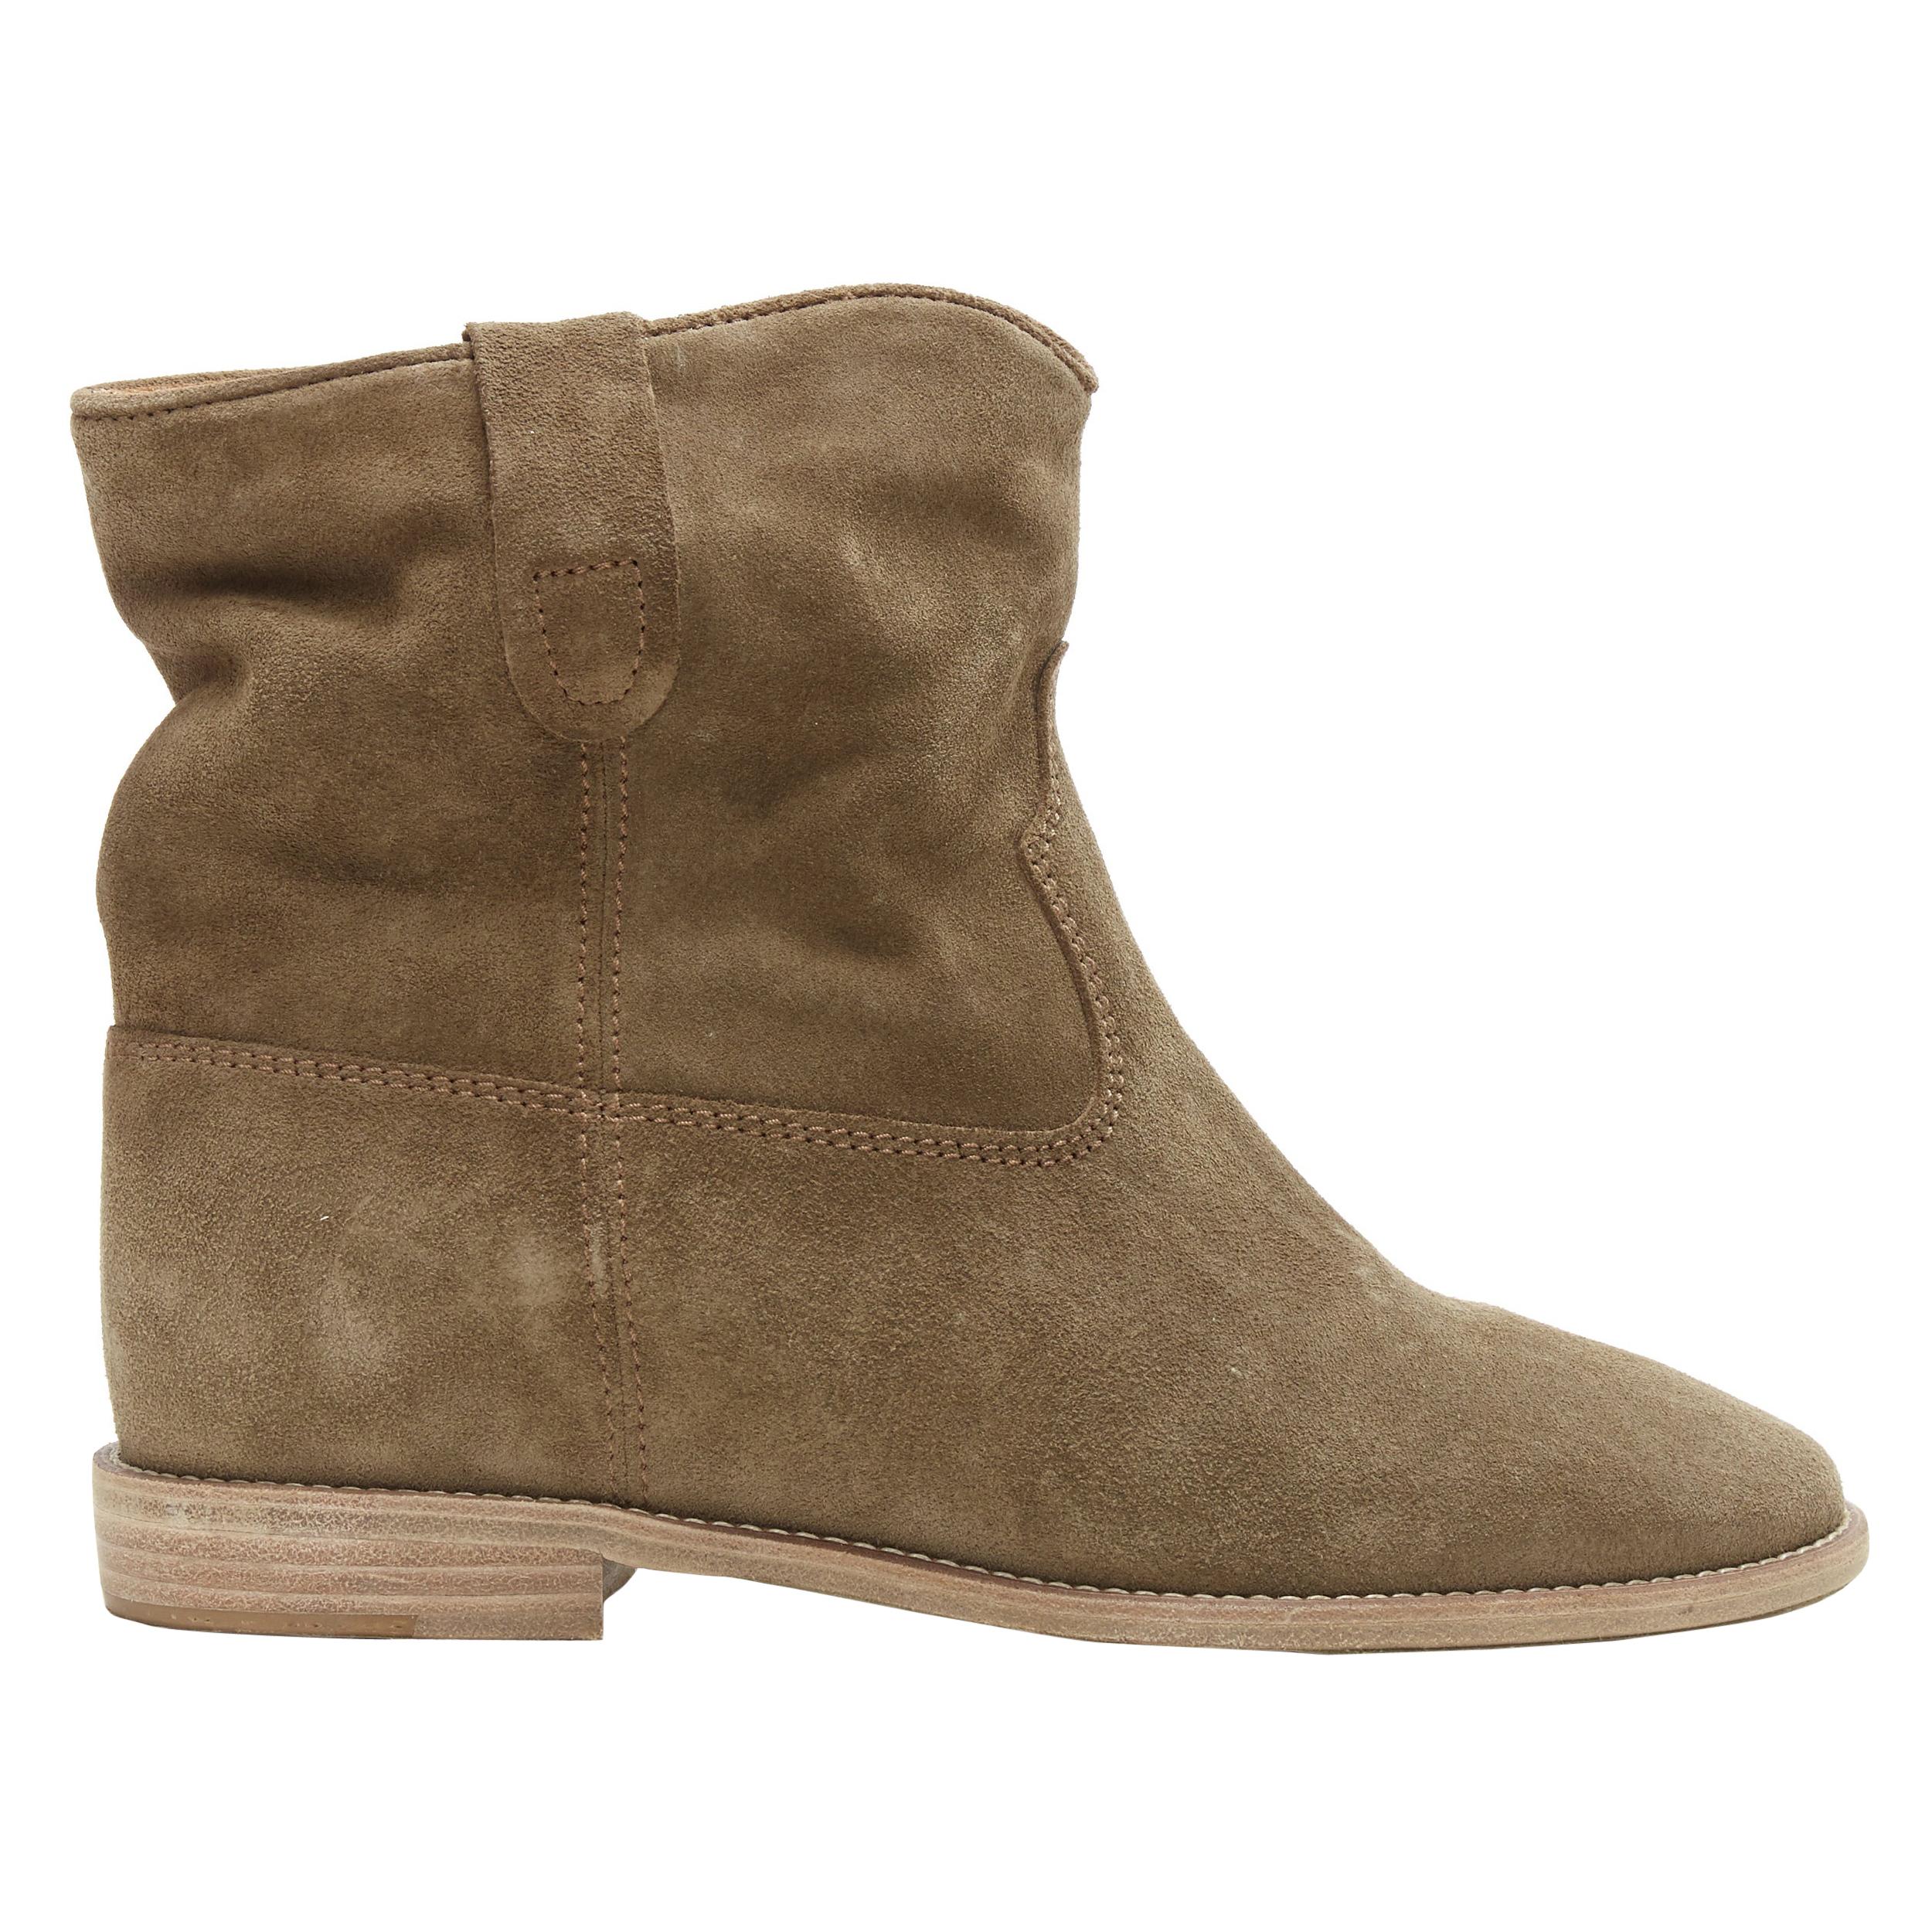 Isabel Marant Crisi Boot - For Sale on 1stDibs | isabel marant crisi boots  sale, isabel marant boots crisi, crisi boots isabel marant